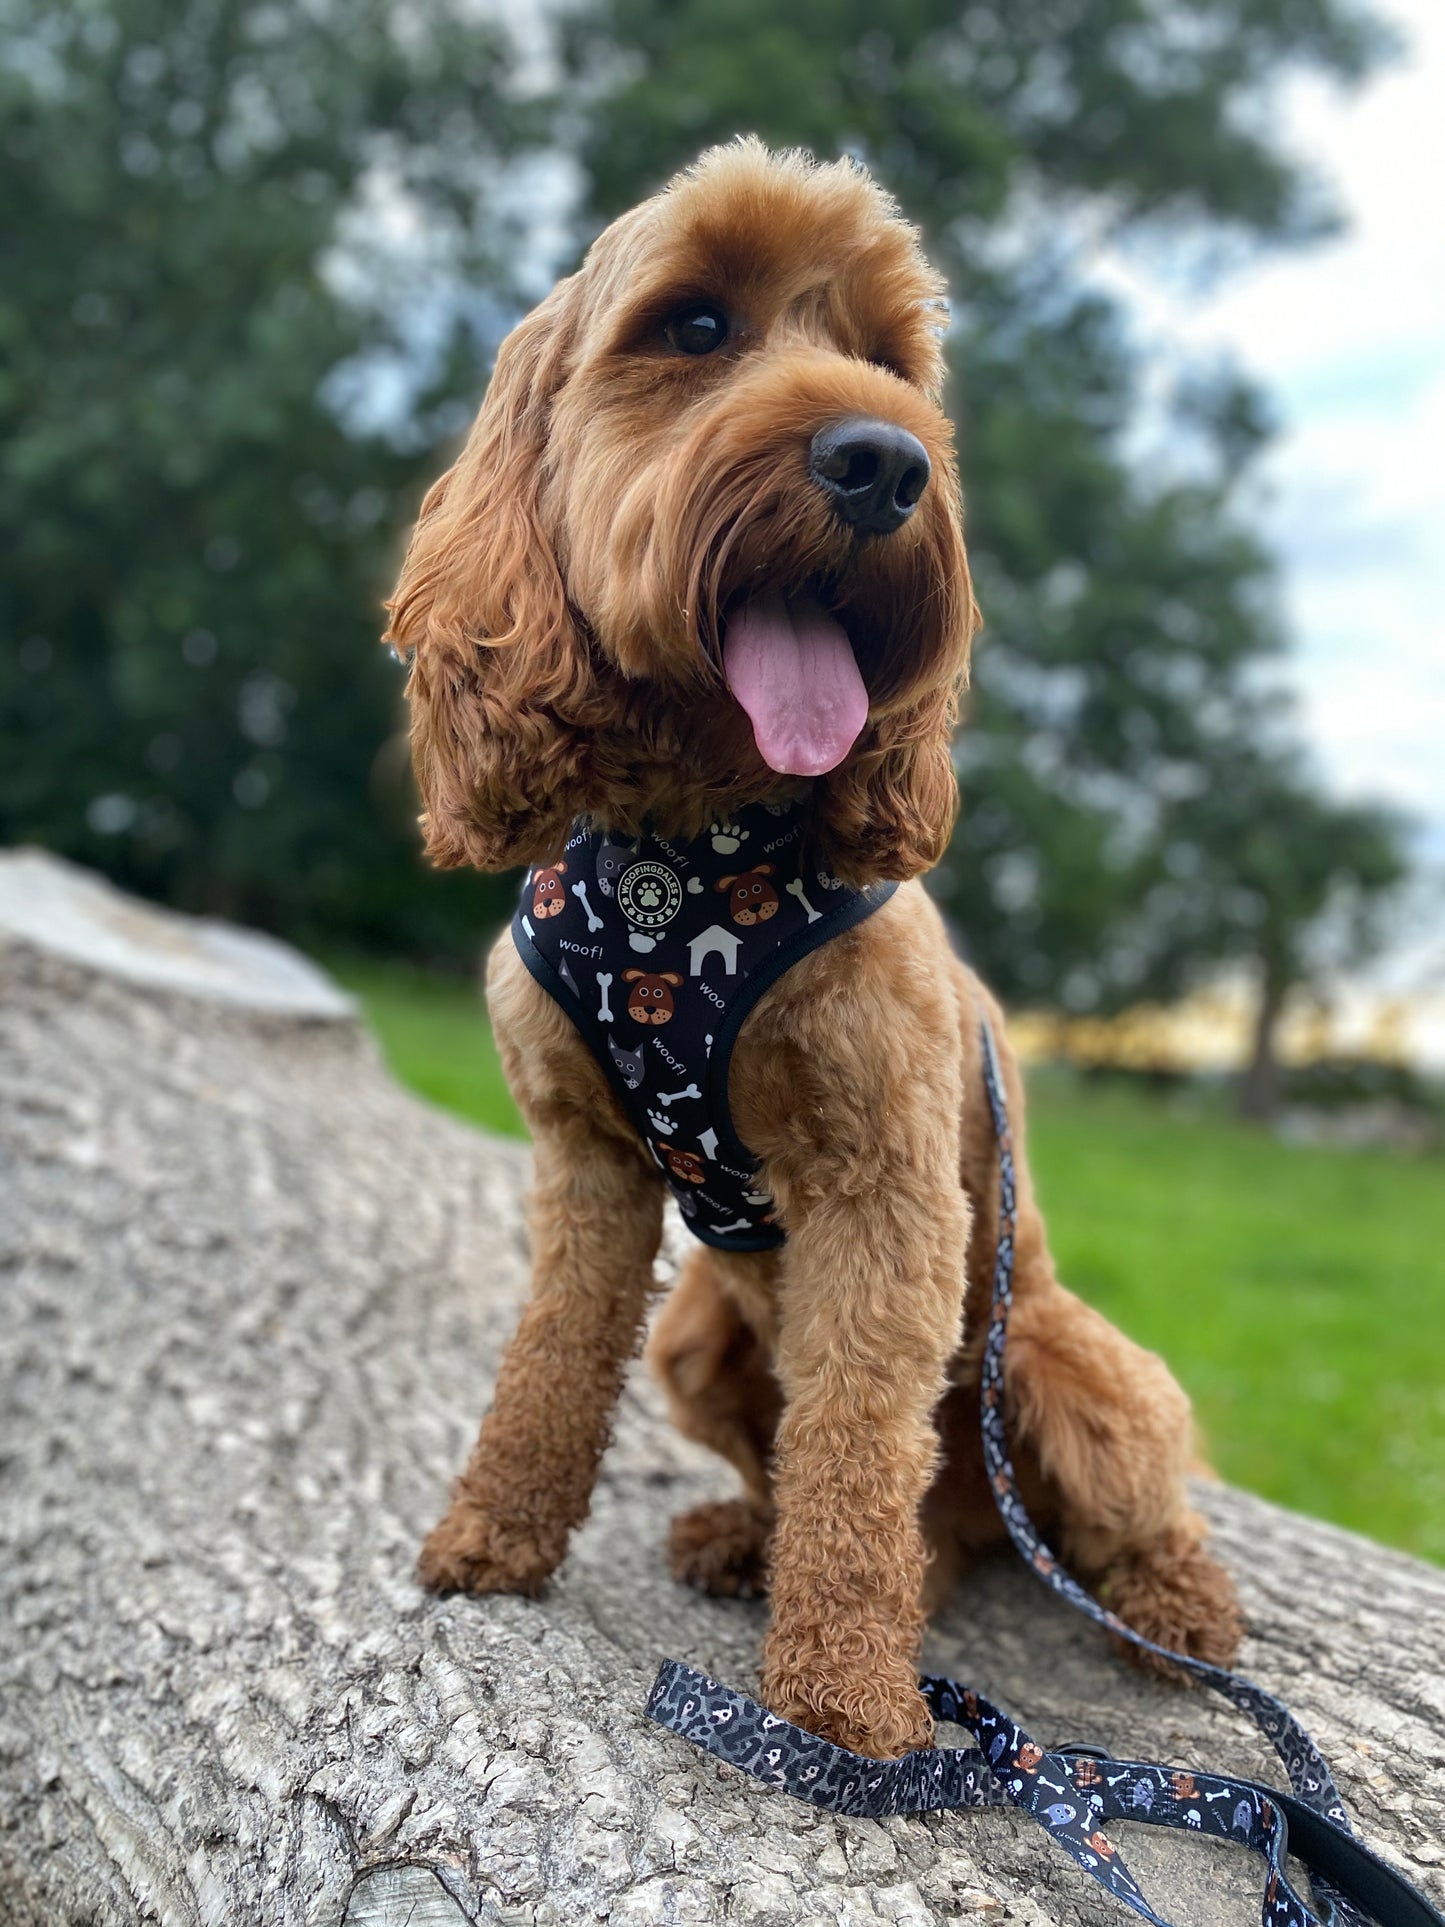 Woofing Good Time Reversible Harness